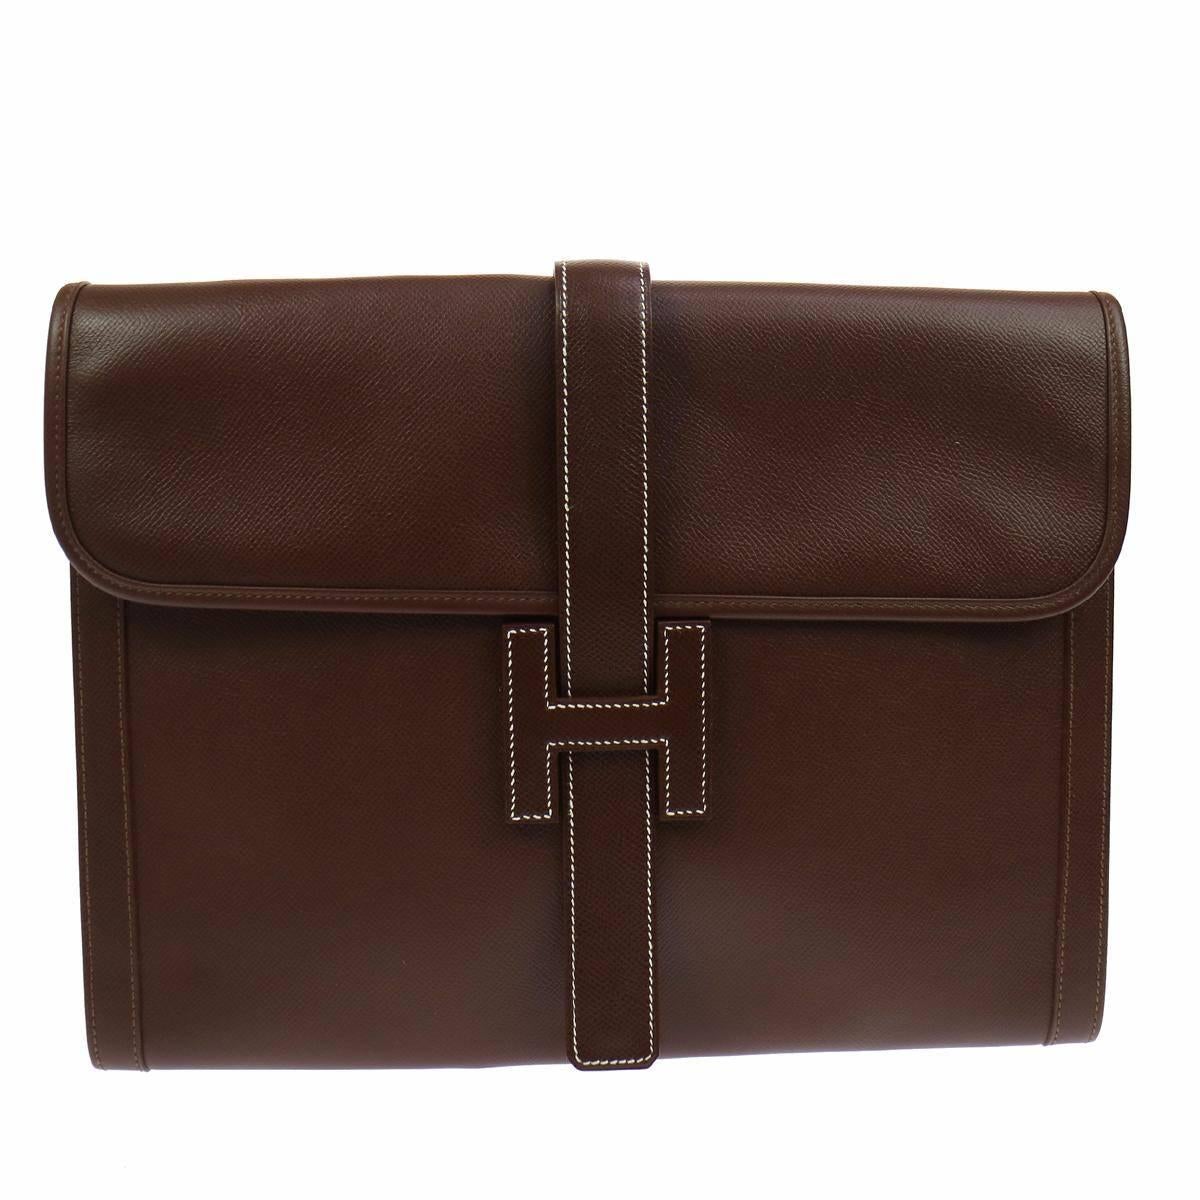 Hermes Like New Chocolate Leather Stitch H Envelope Evening Clutch Flap Bag